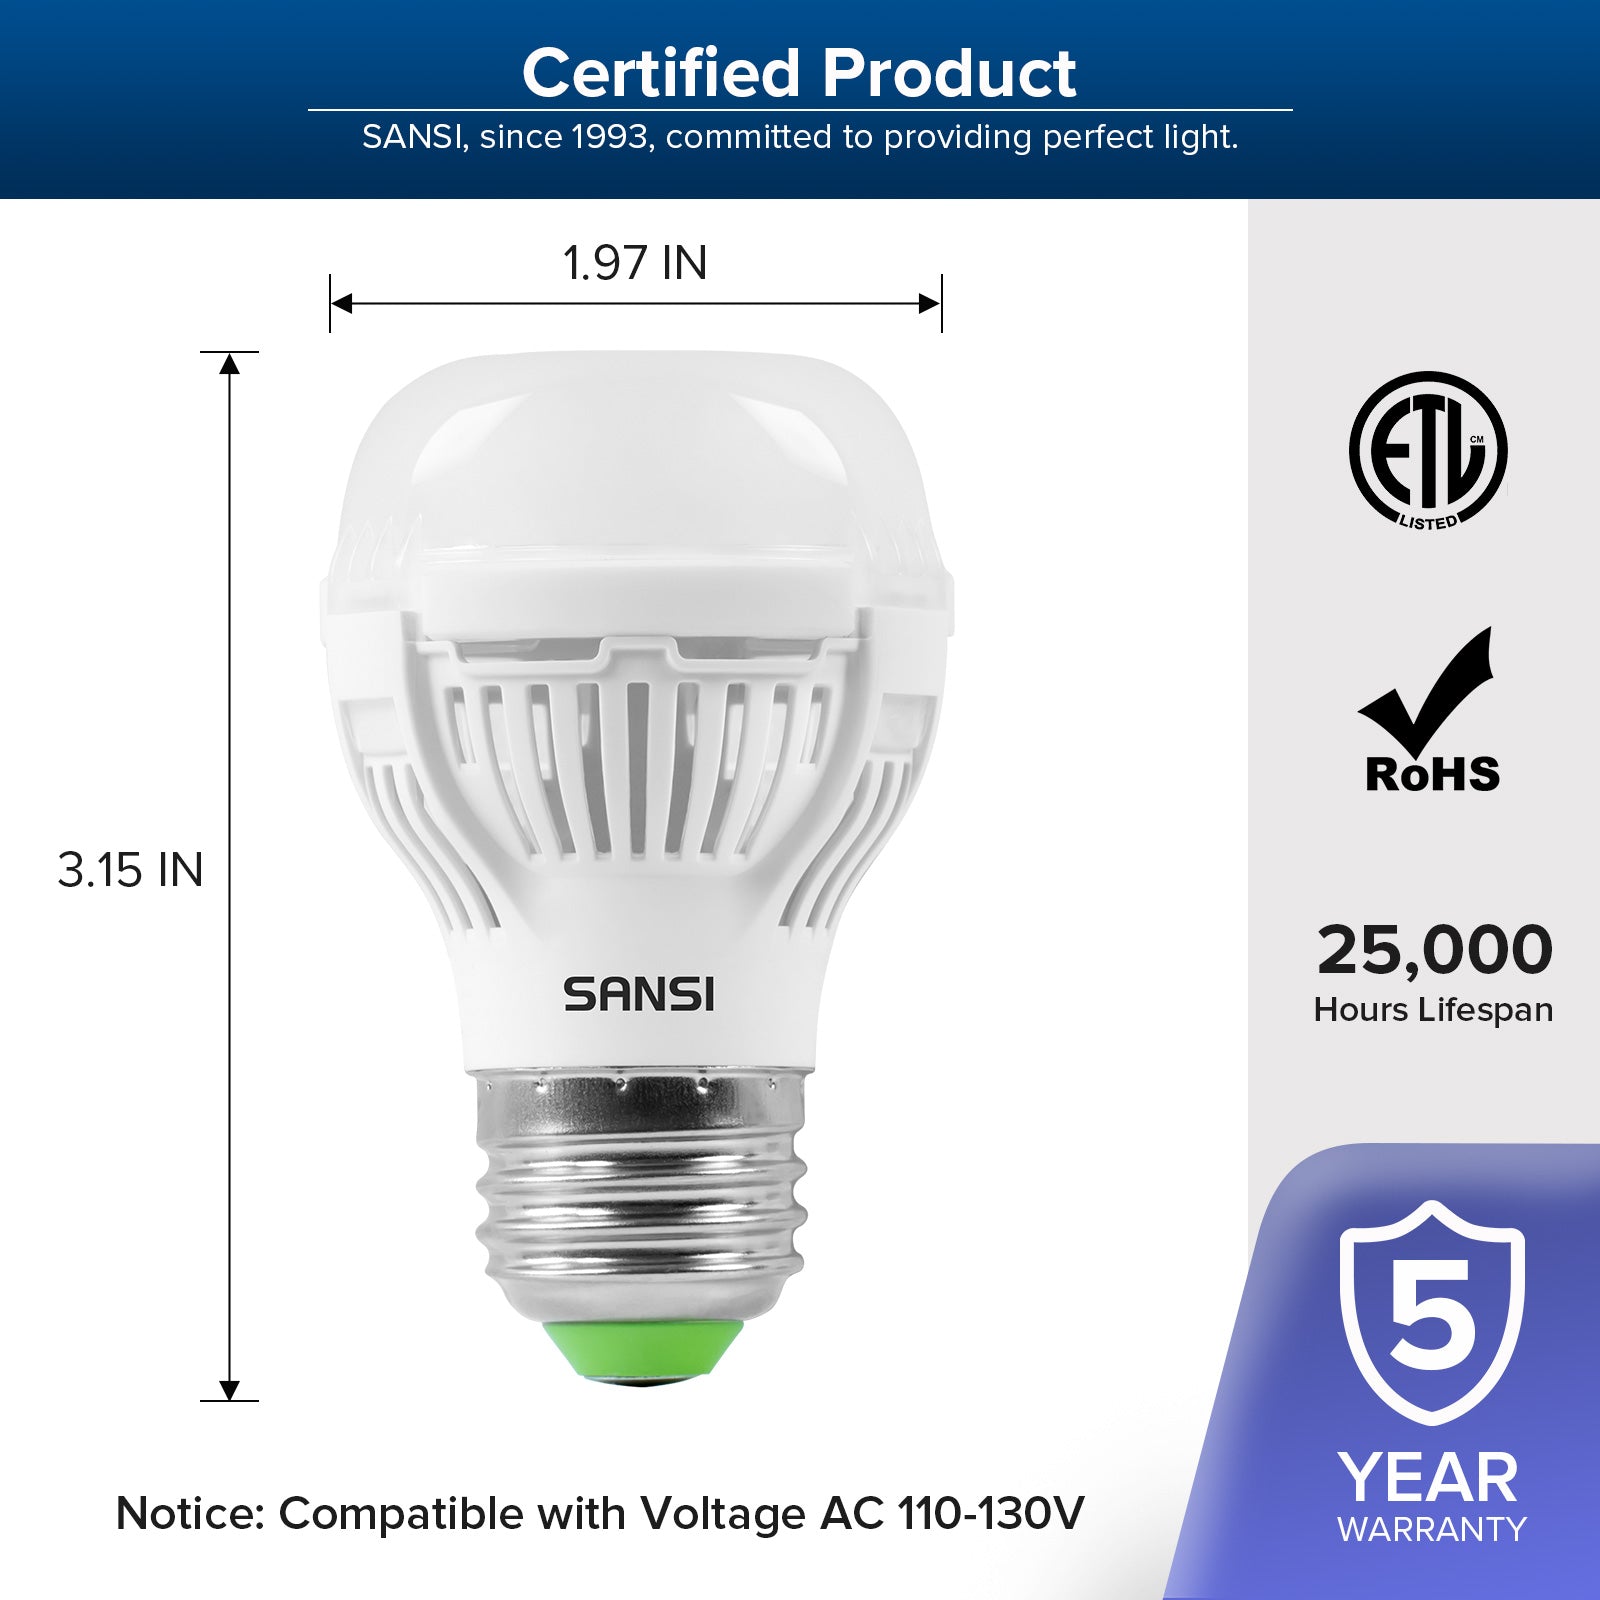 Upgraded A15 9W led light bulb has ROHS certification, 25,000 hours lifespan